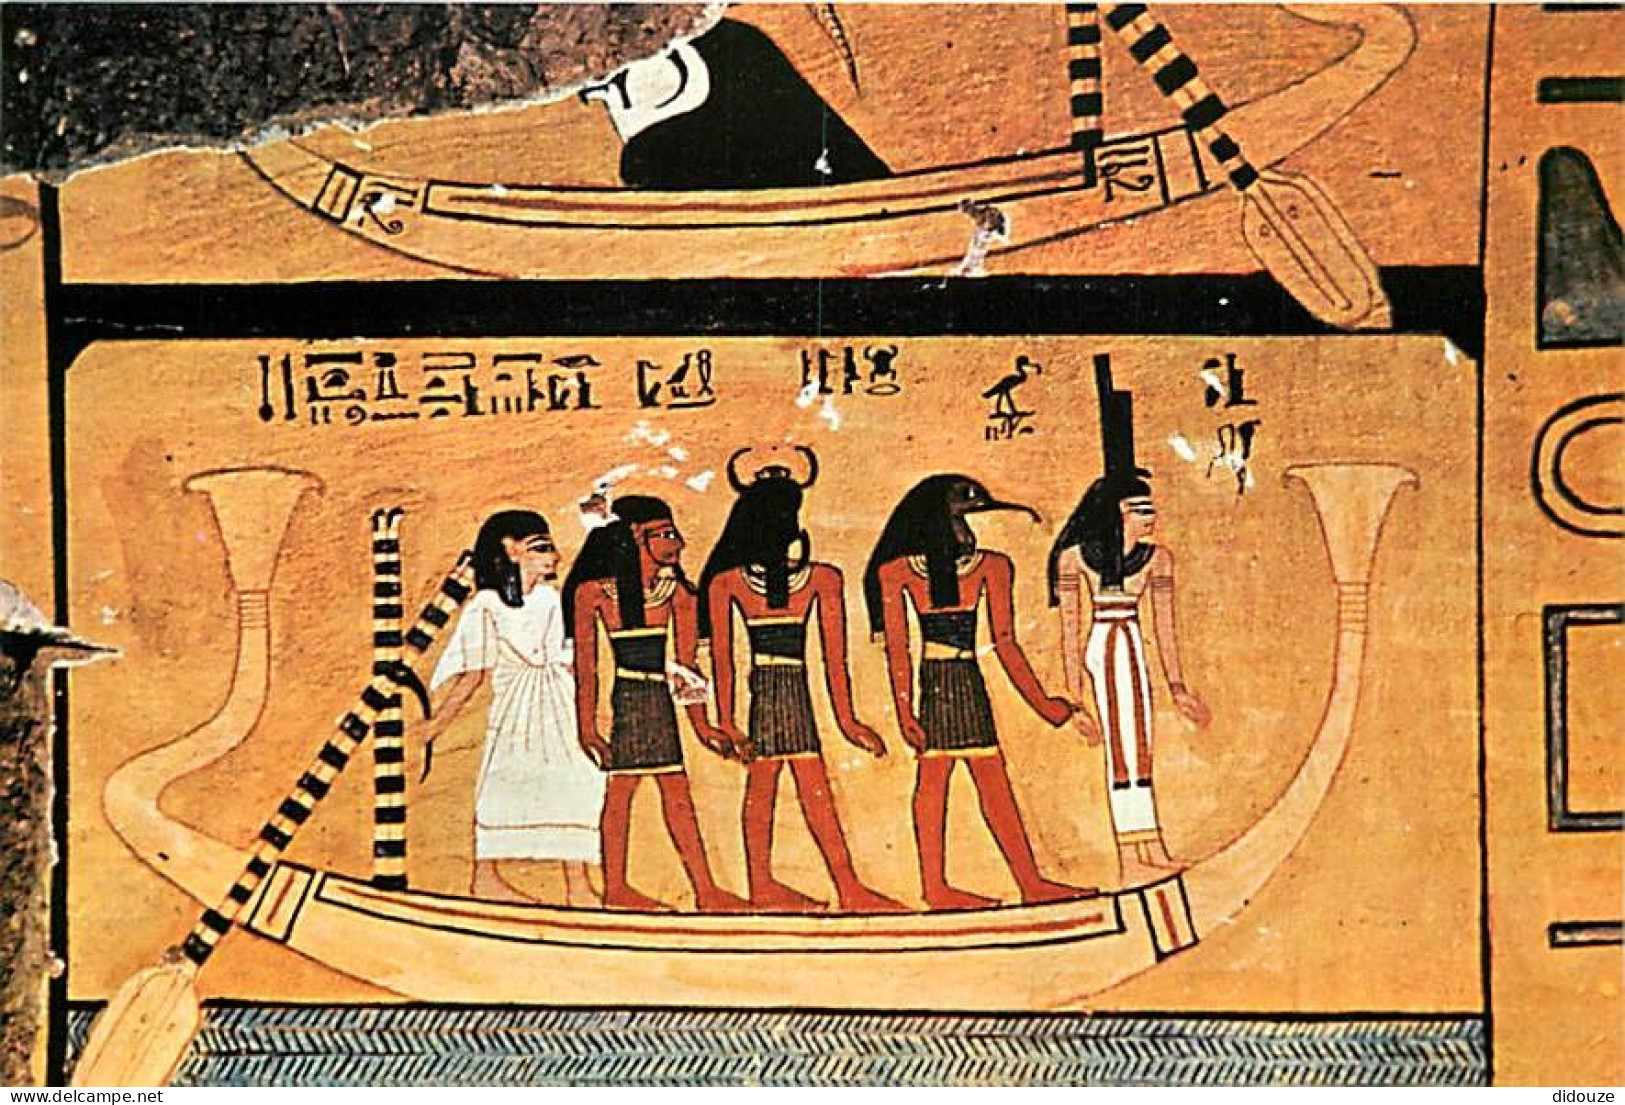 Egypte - Antiquité Egyptienne - Tomb Of Noble Anher-khaou 1186 B.C. - The Deceased Navigating In The Netherworld Accompa - Musei